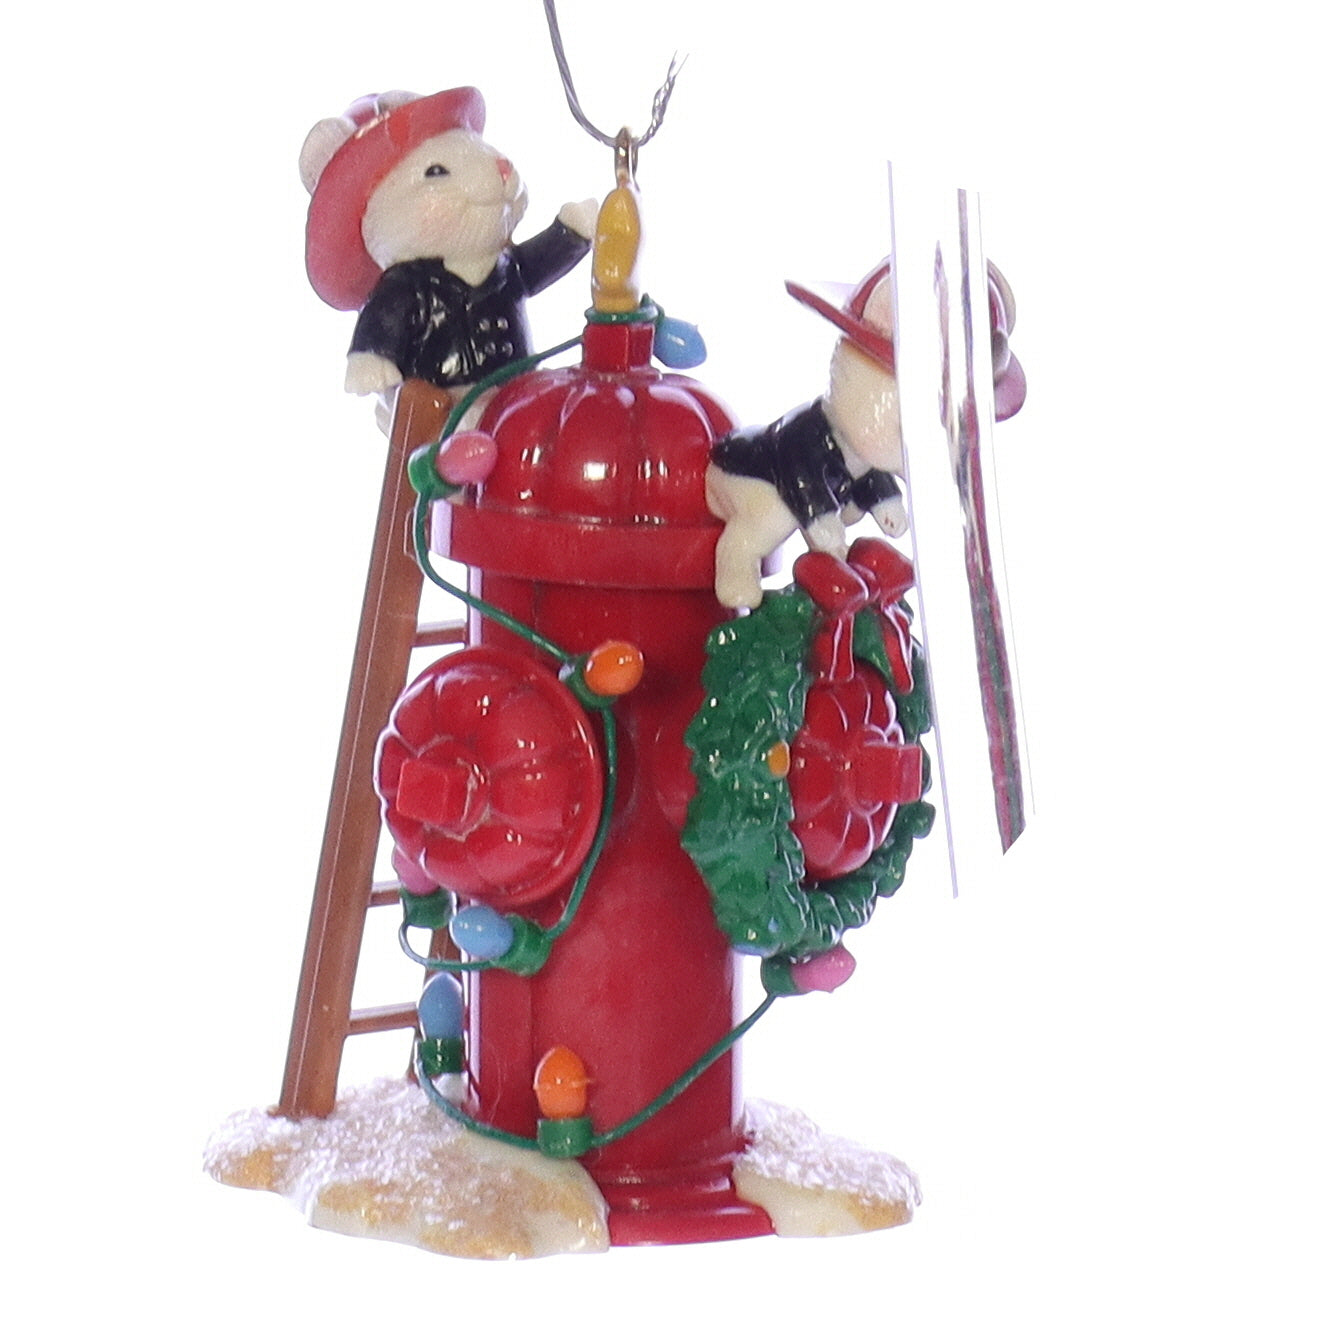 Enesco_Treasury_of_Christmas_Ornaments_573825_Warmest_Wishes_Northpole_Fire_Department_Mouse_Ornament_1990 Back Right View